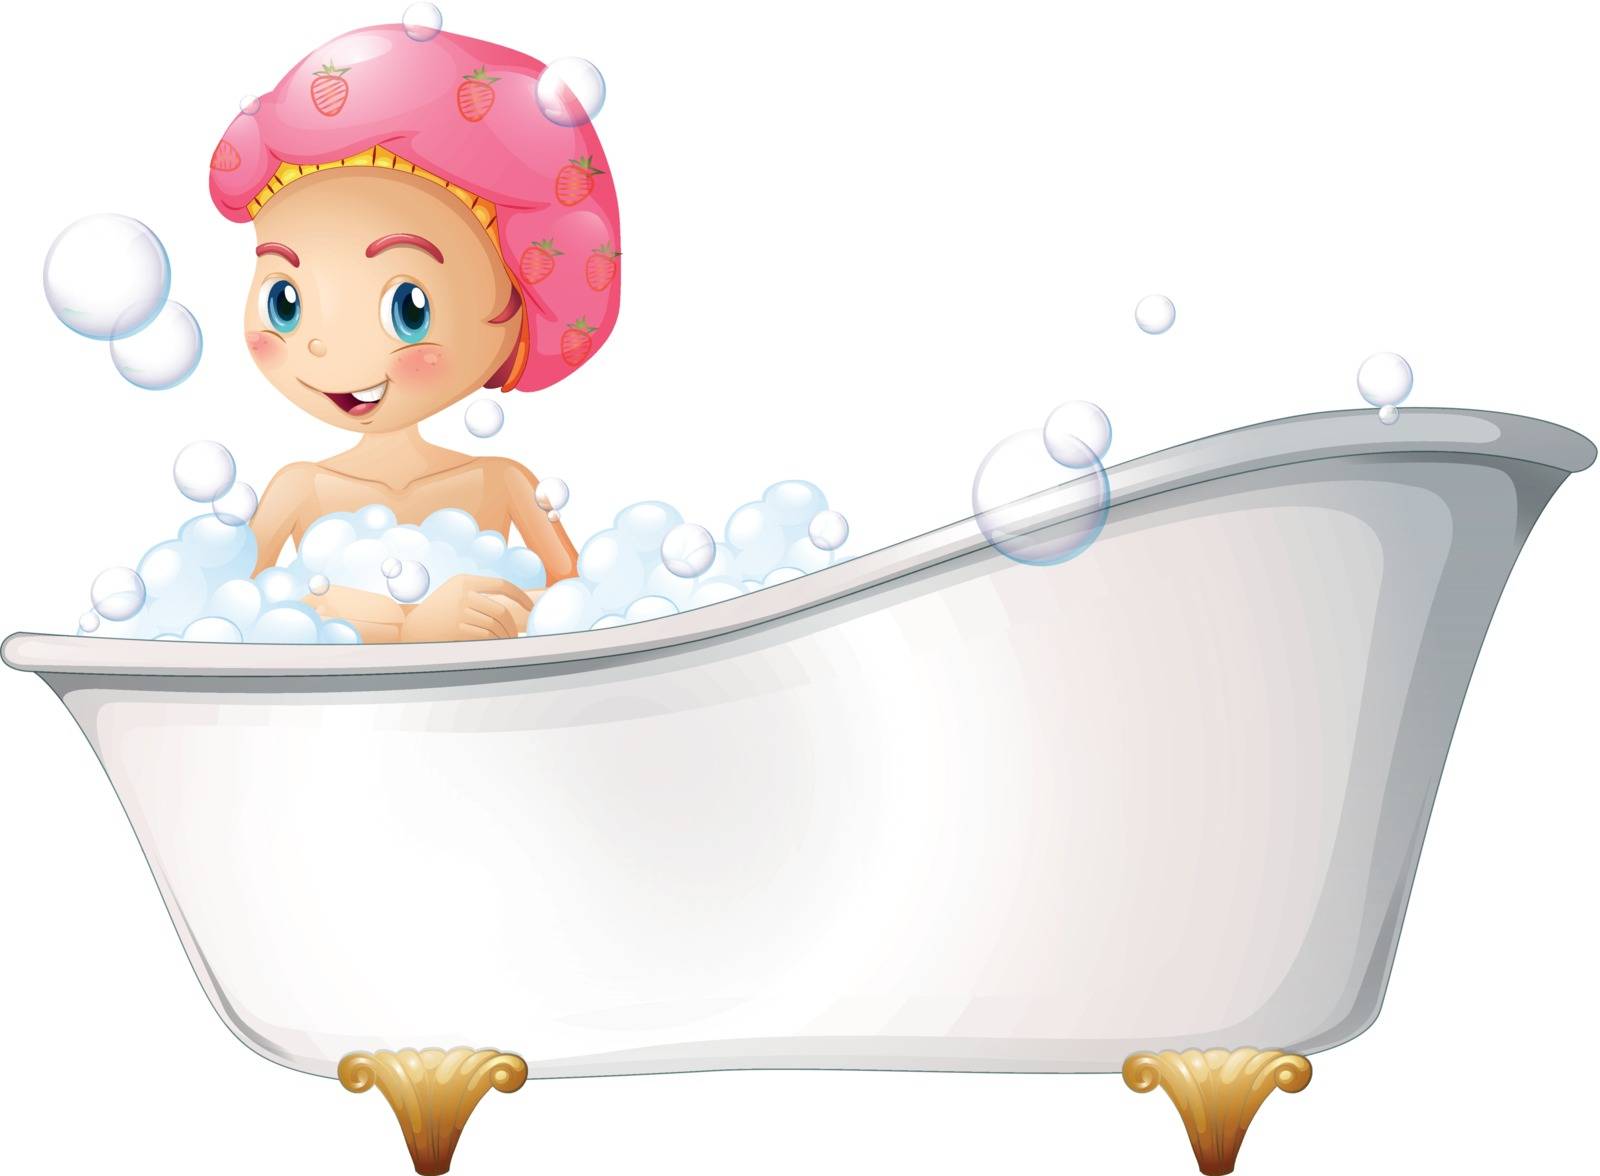 Illustration of a young girl taking a bath on a white background